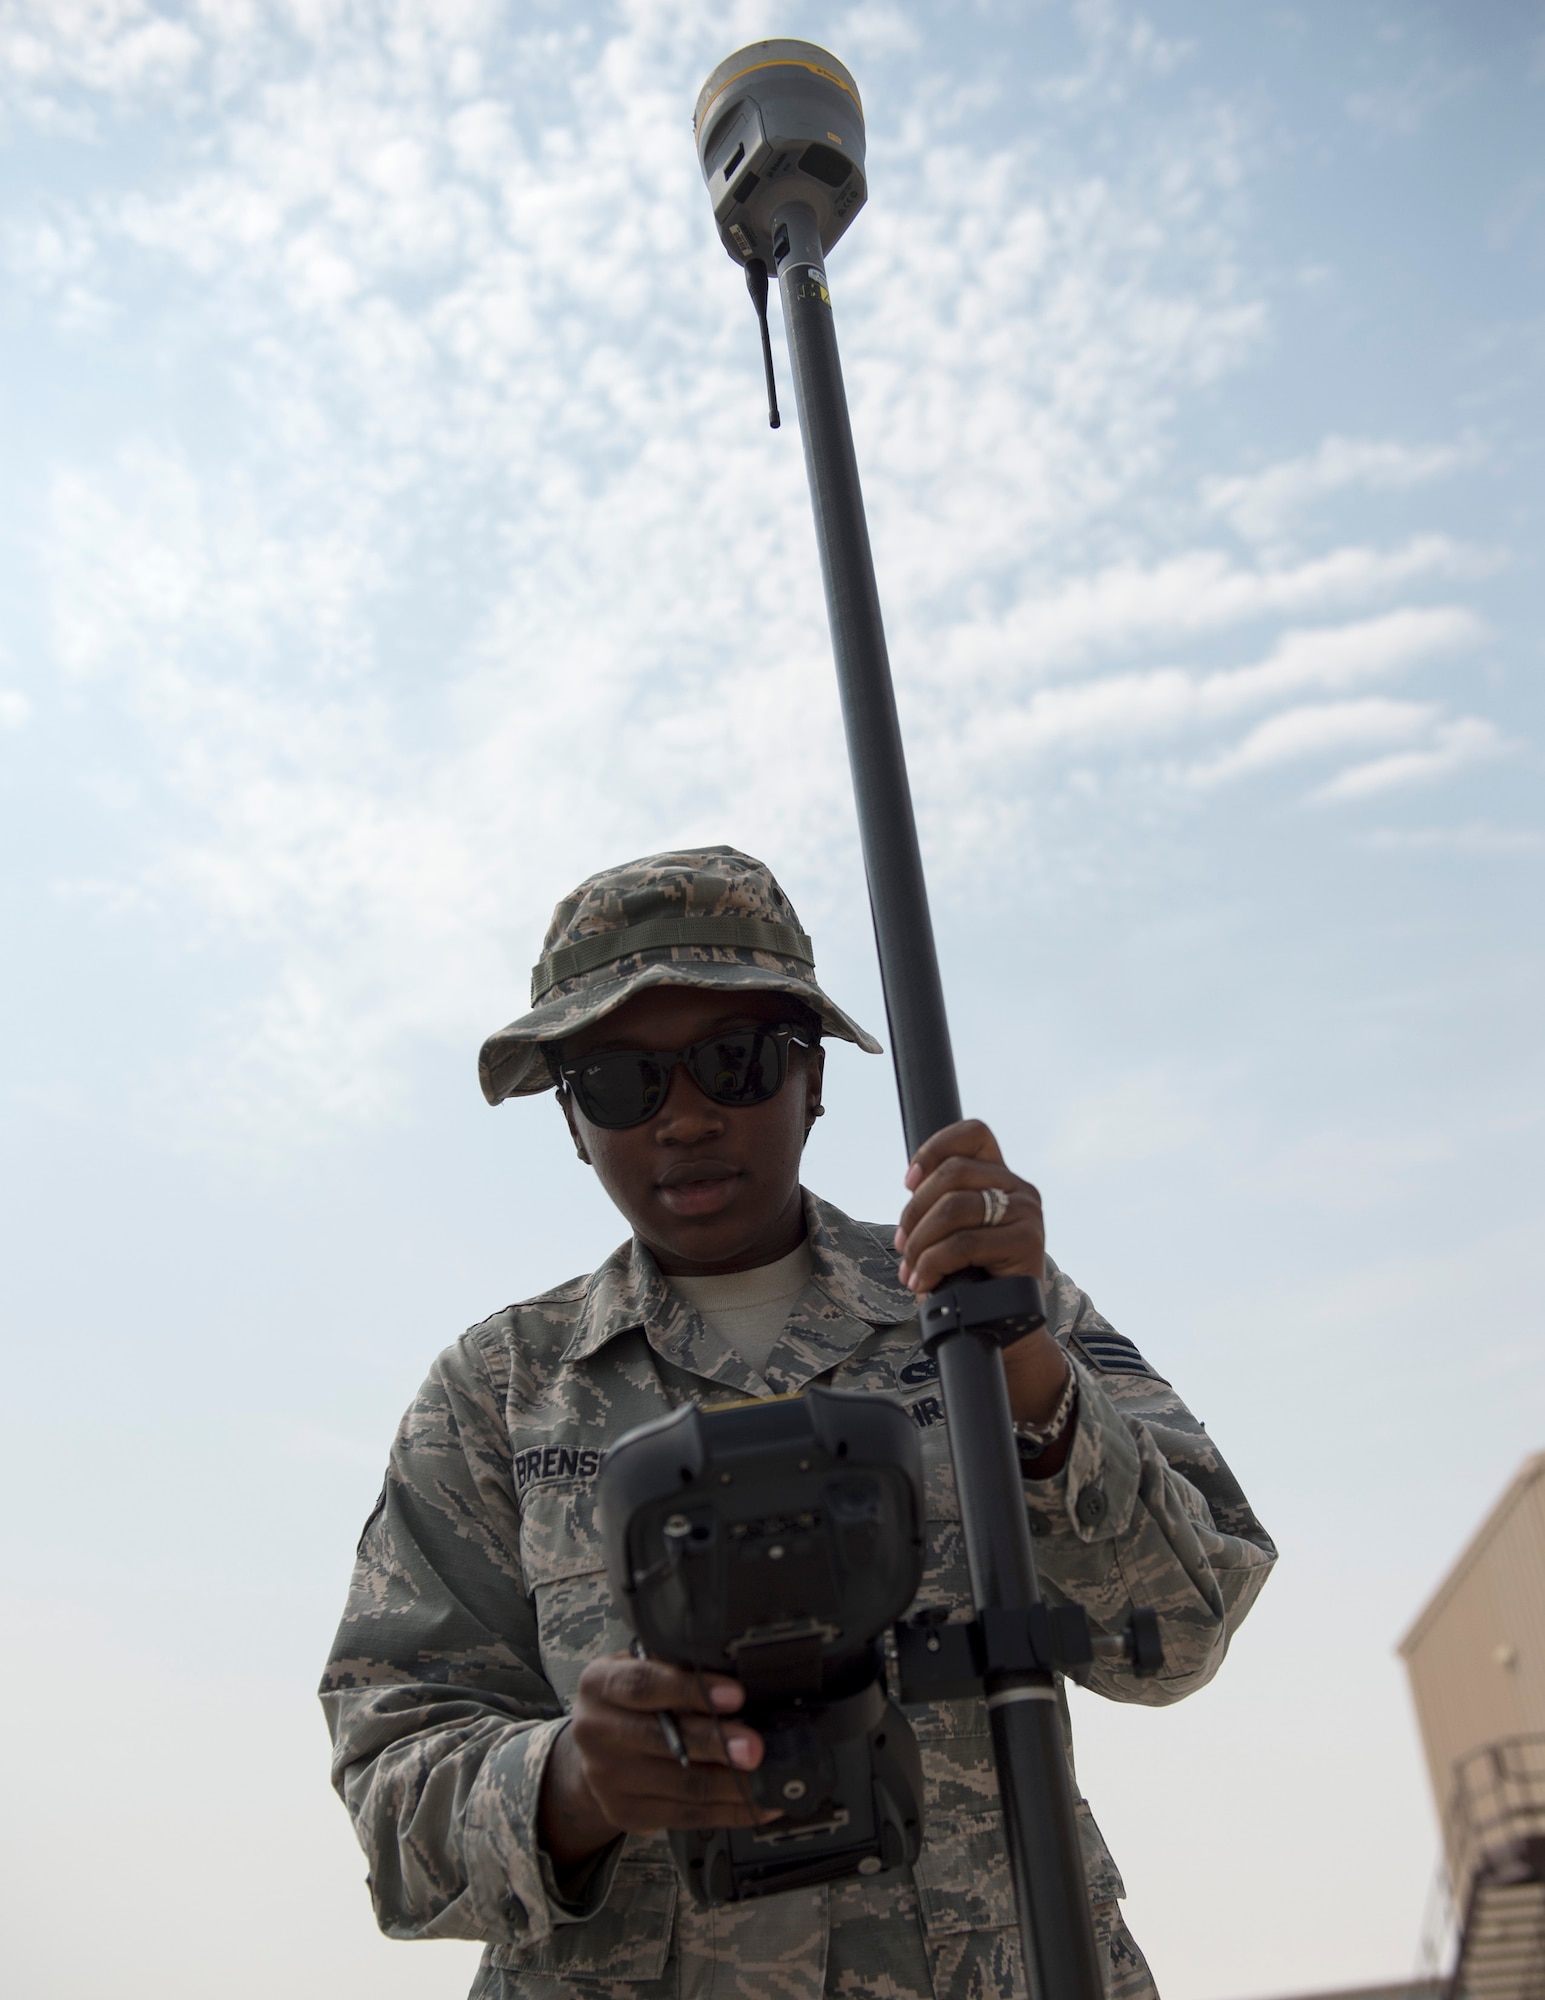 U.S Air Force Senior Airman Dalicia Brenson, an engineering technician with the 379th Expeditionary Civil Engineer Squadron, confirms the coordinate and elevation on the Trimble GPS Land Surveying Equipment at Al Udeid Air Base, Qatar, Aug. 2, 2017.